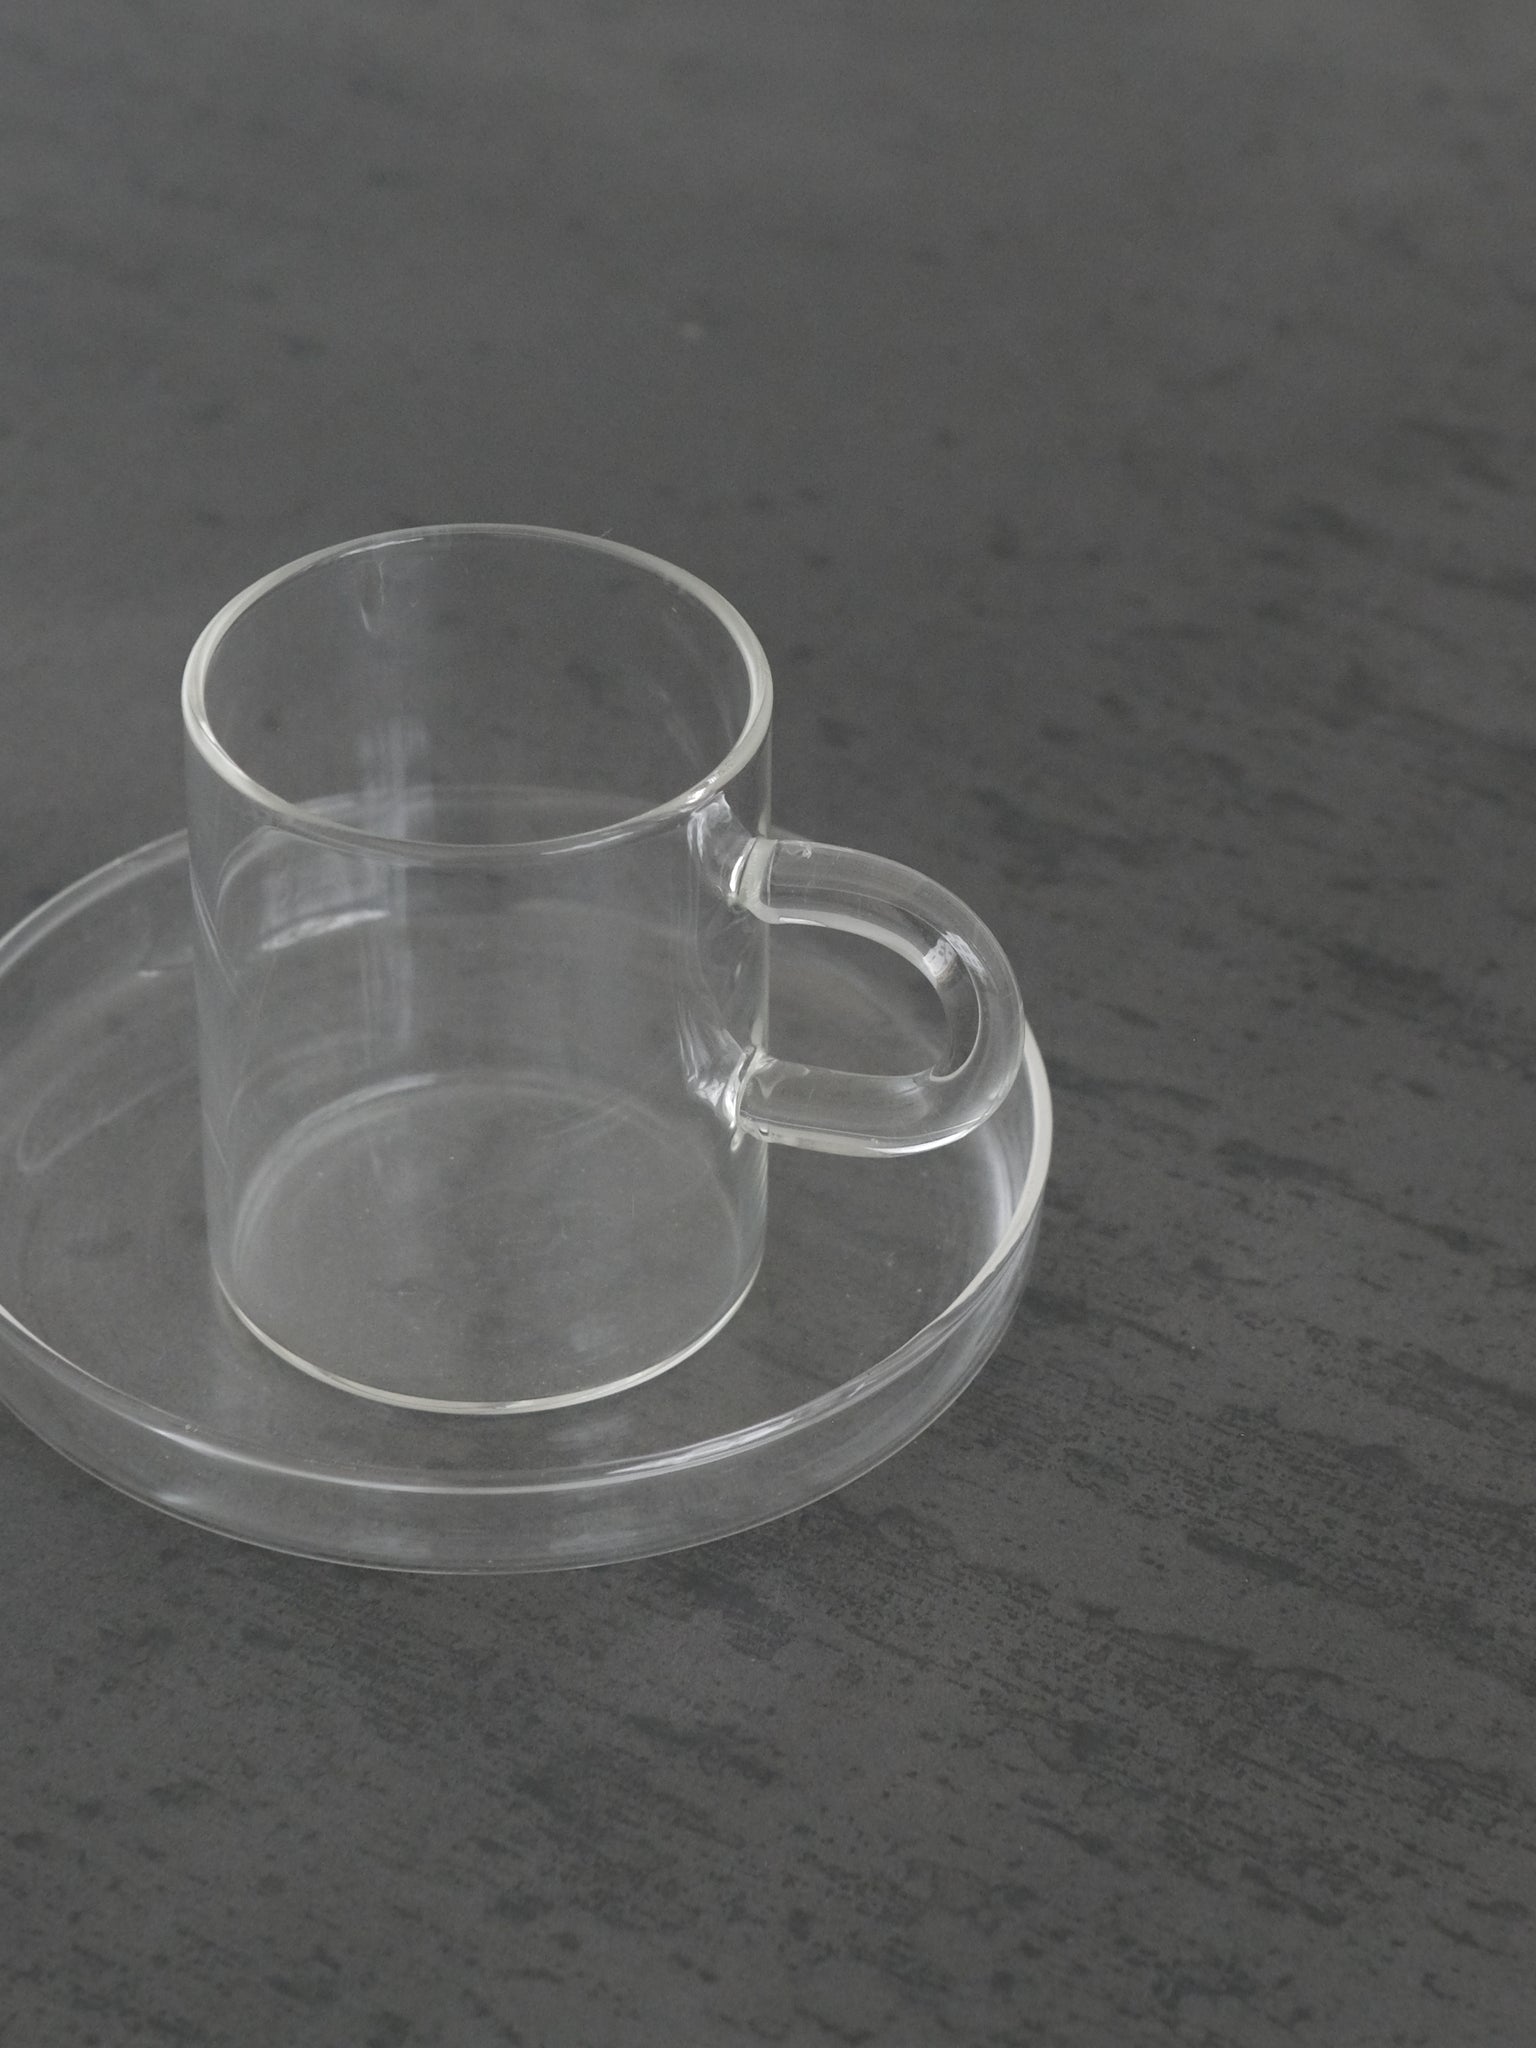 Espresso cup with saucer